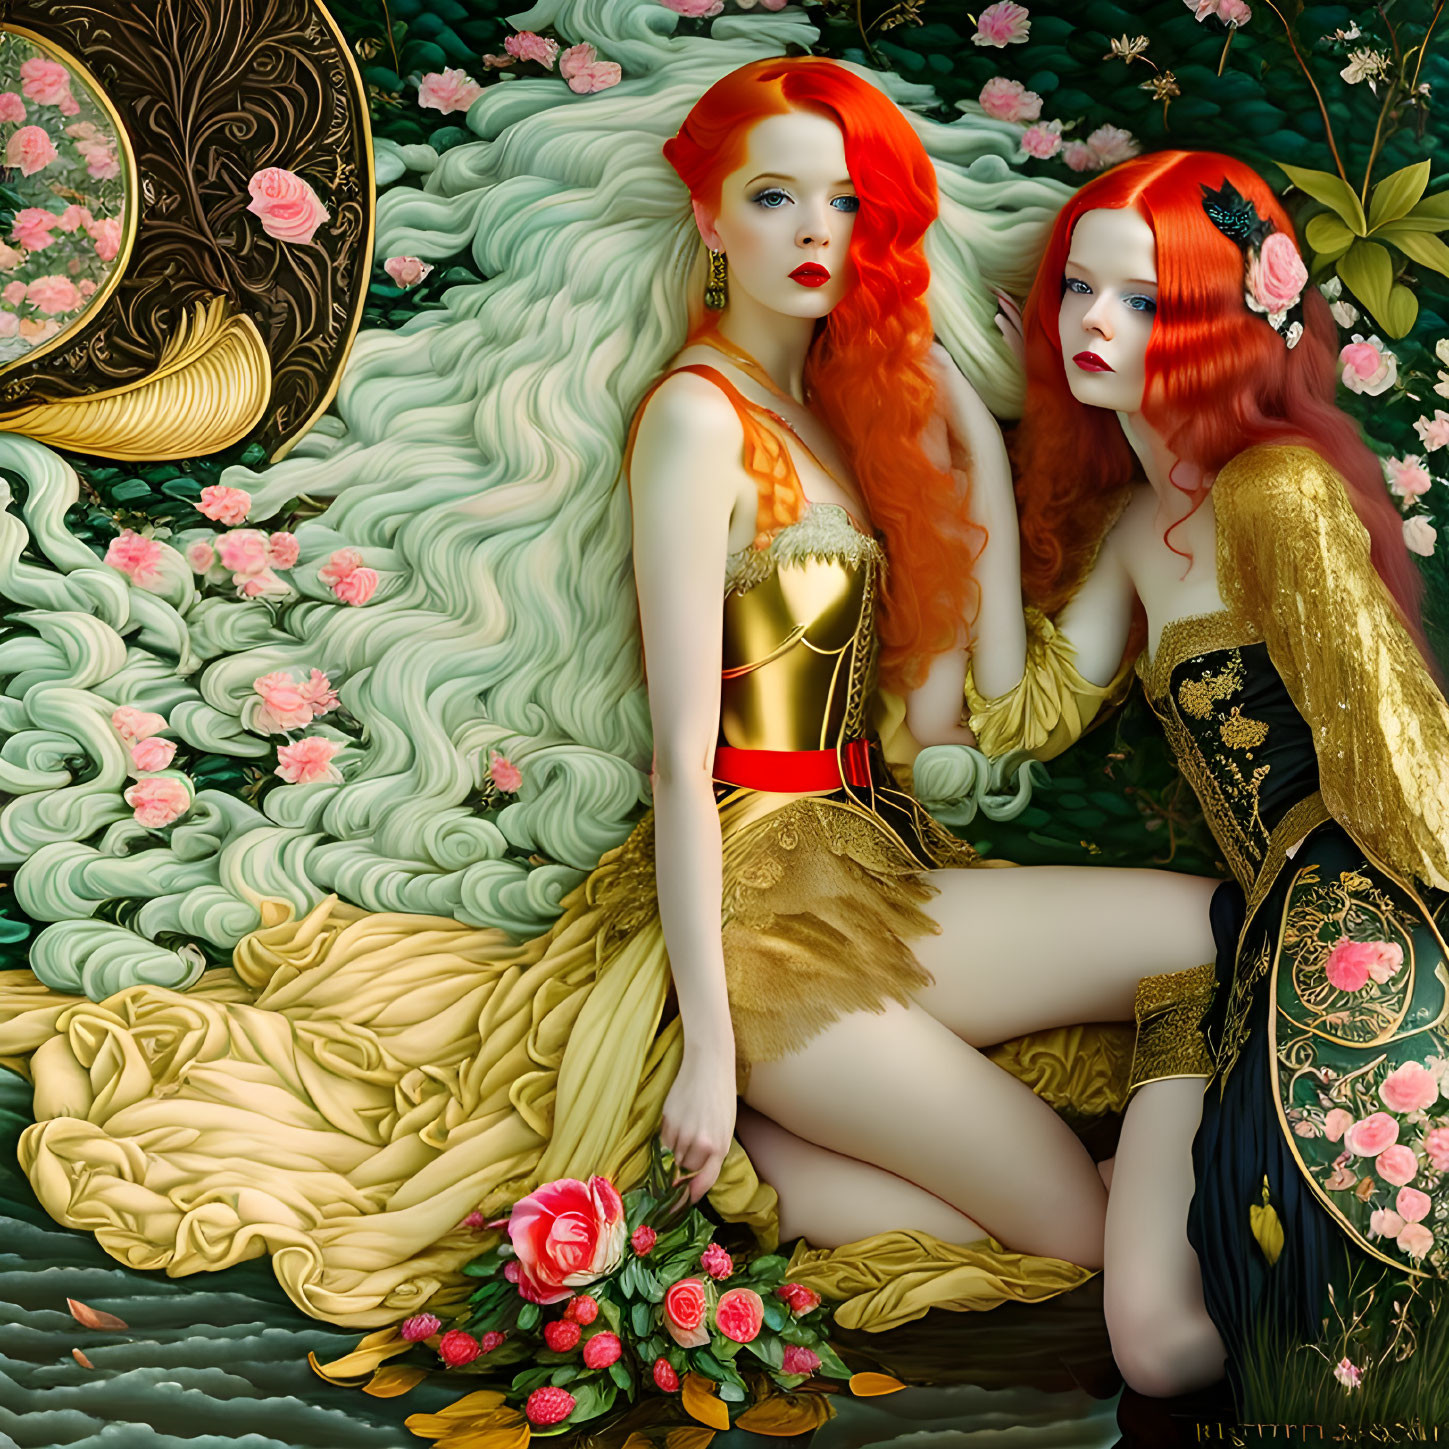 Stylized women with red hair in ornate costumes in floral setting